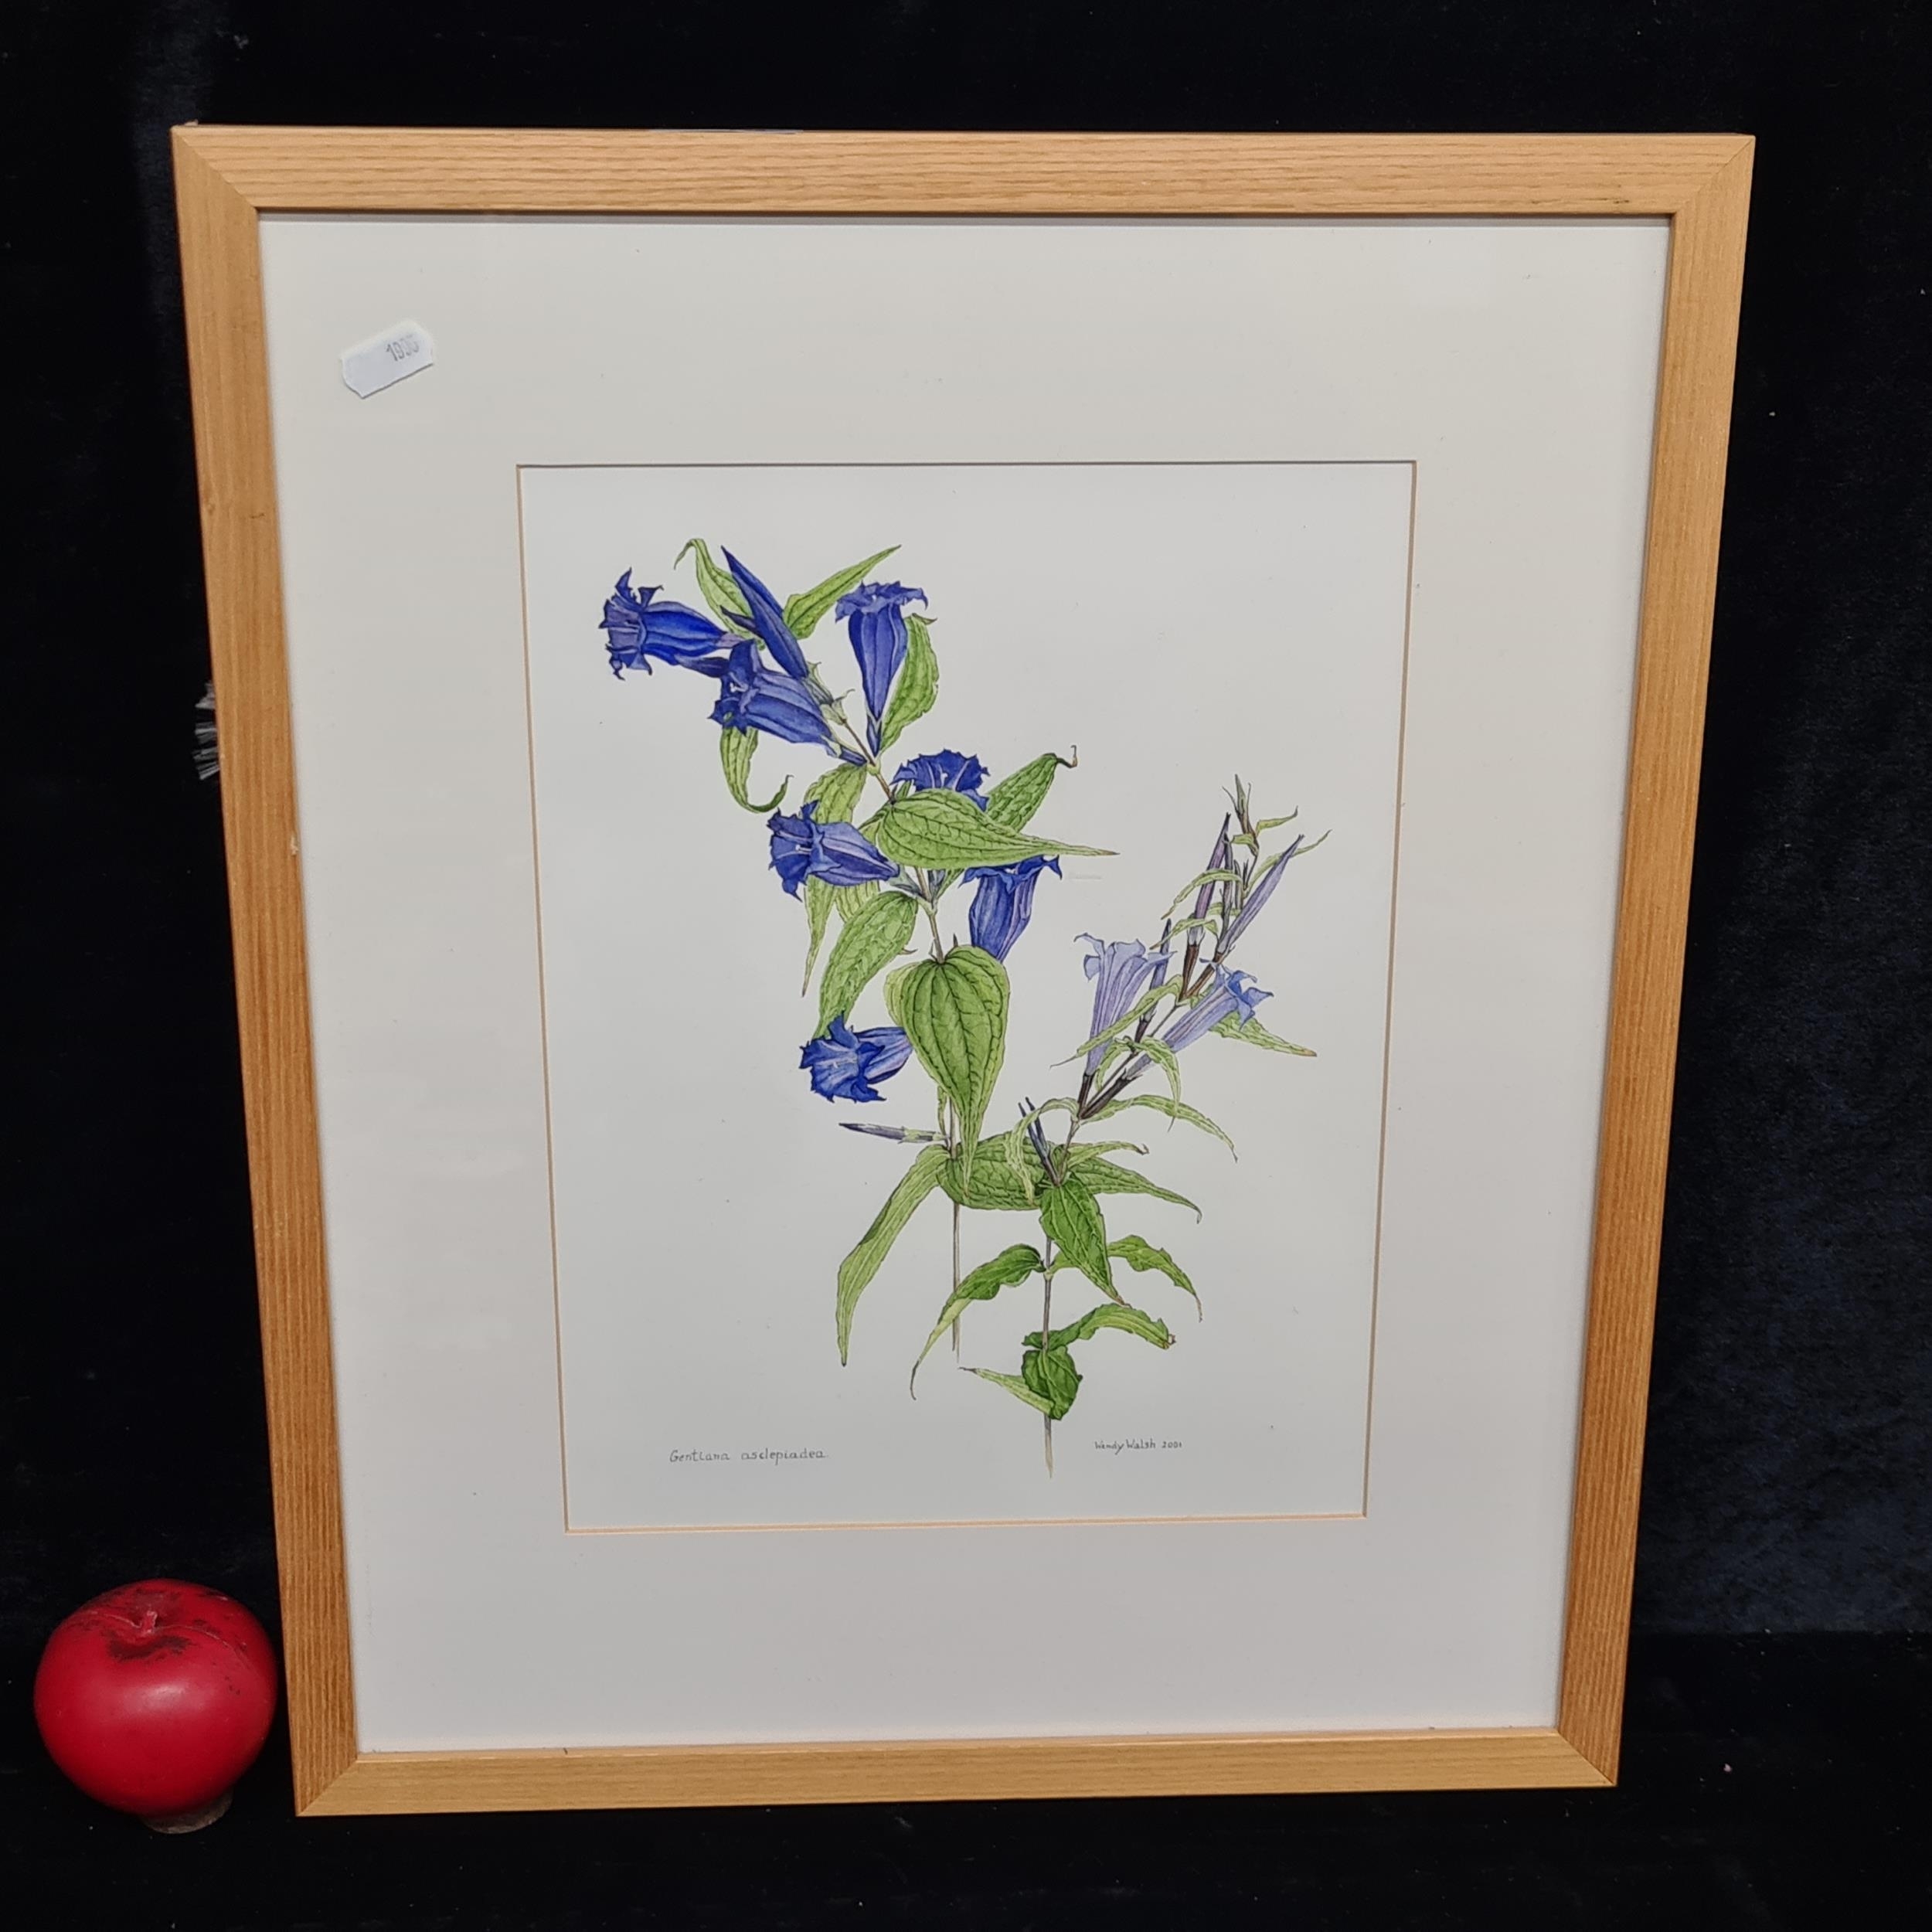 A botanical study of Gentiana Asclepiadea / Willow Gentian - Wendy Walsh